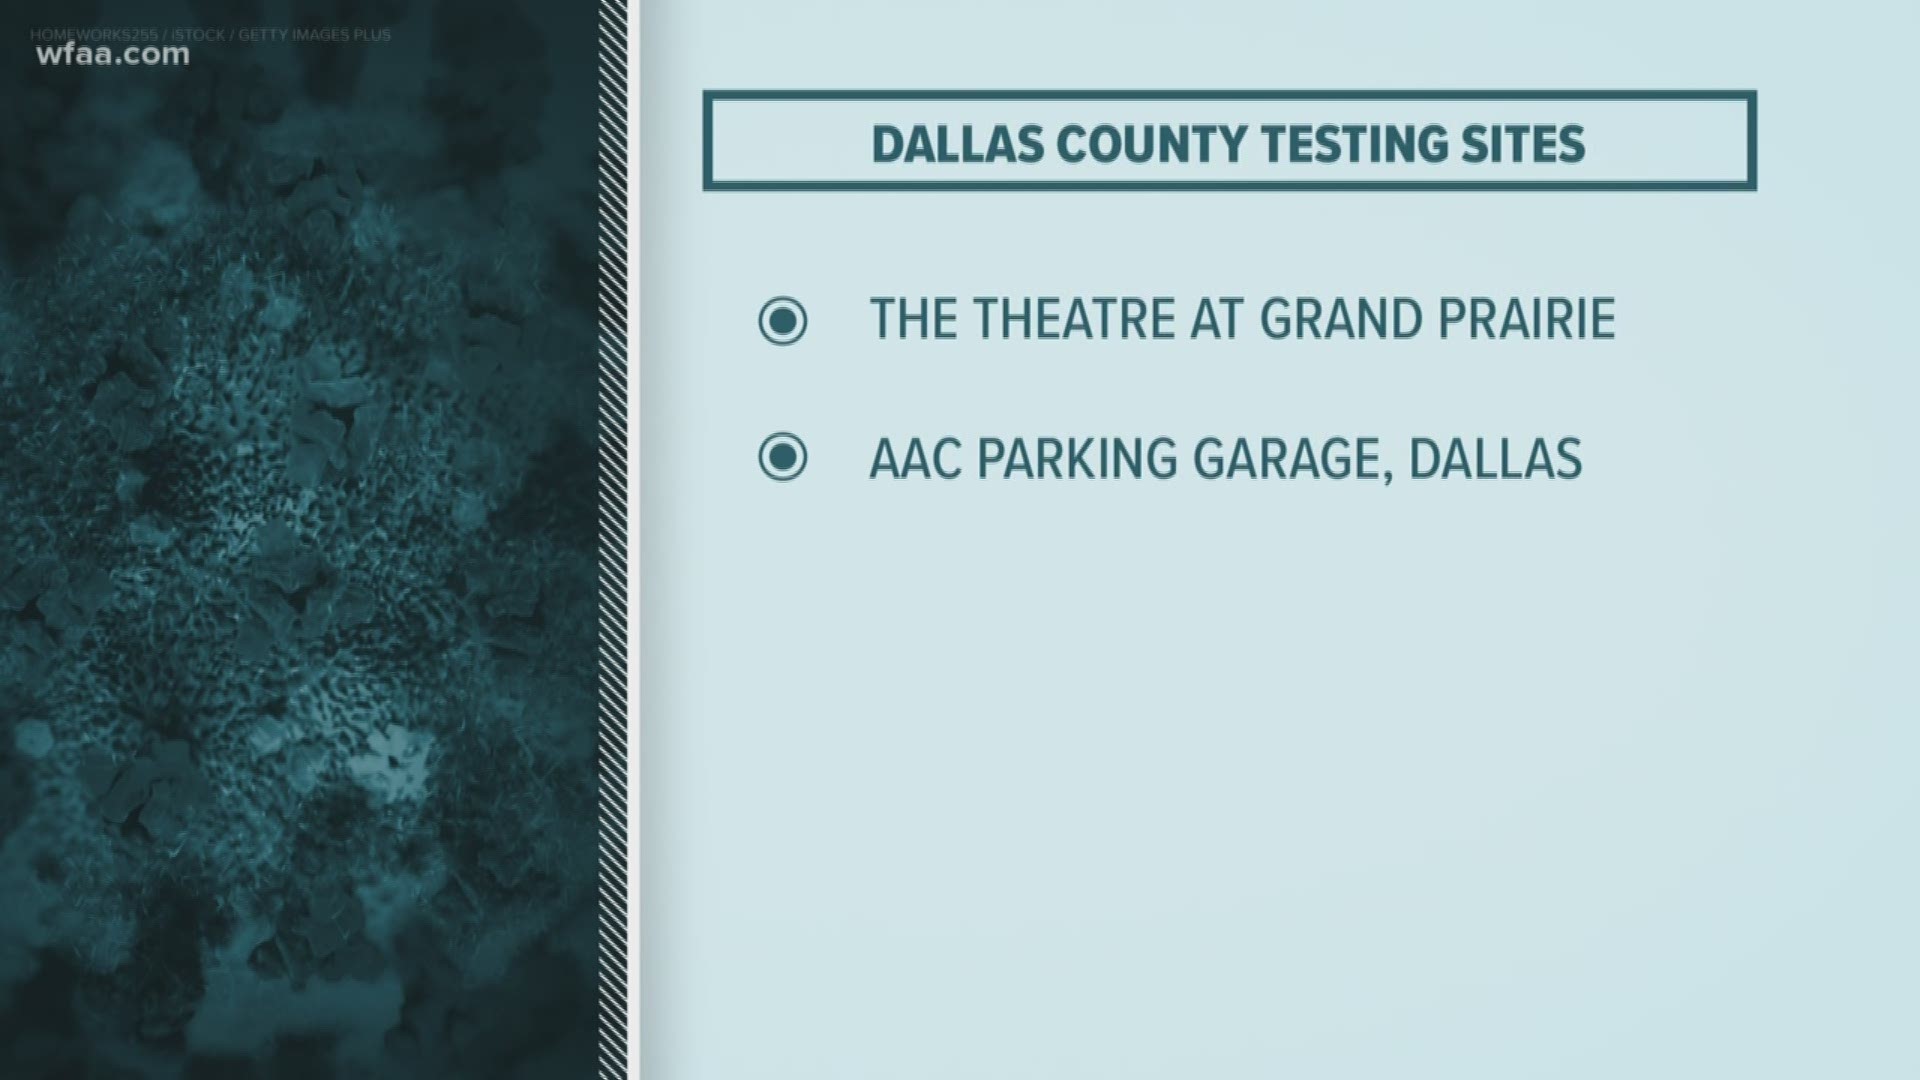 Two new testing sites will be here soon, Dallas County Judge Clay Jenkins said Monday.